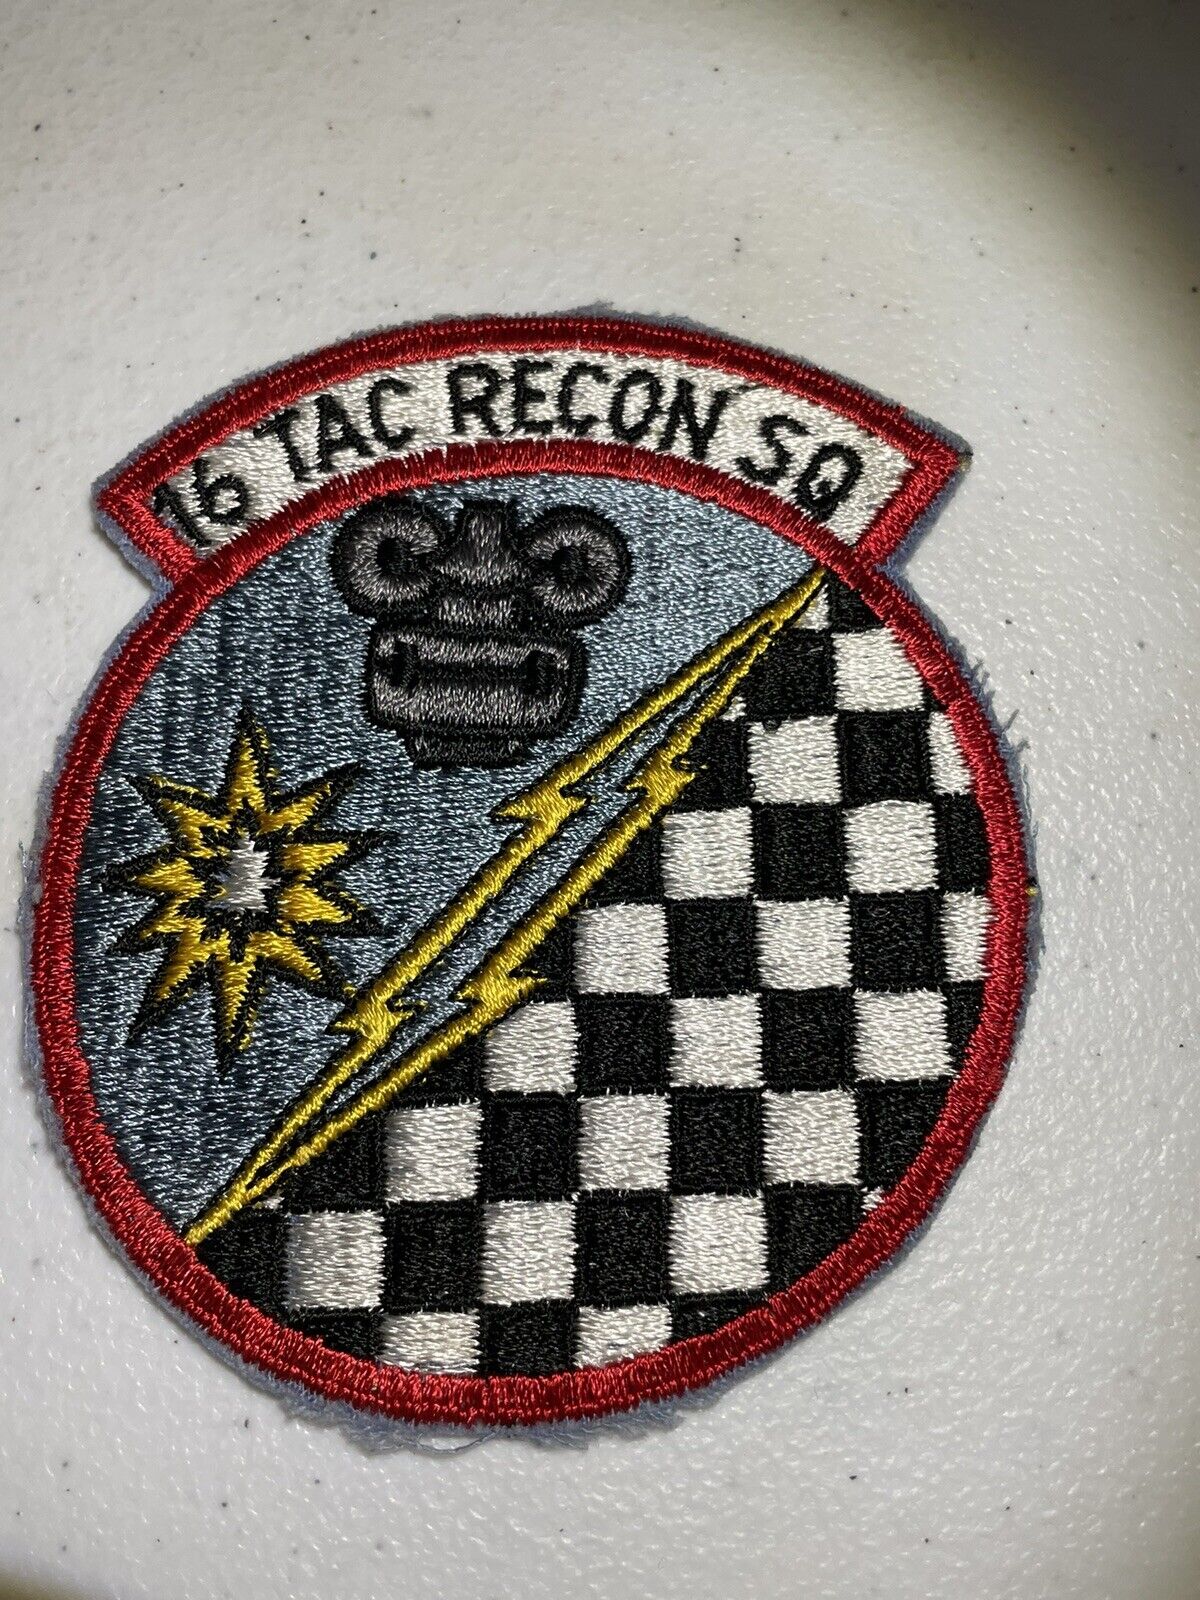 USAF 16th Tactical Reconnaissance Squadron Patch (post 80s make)